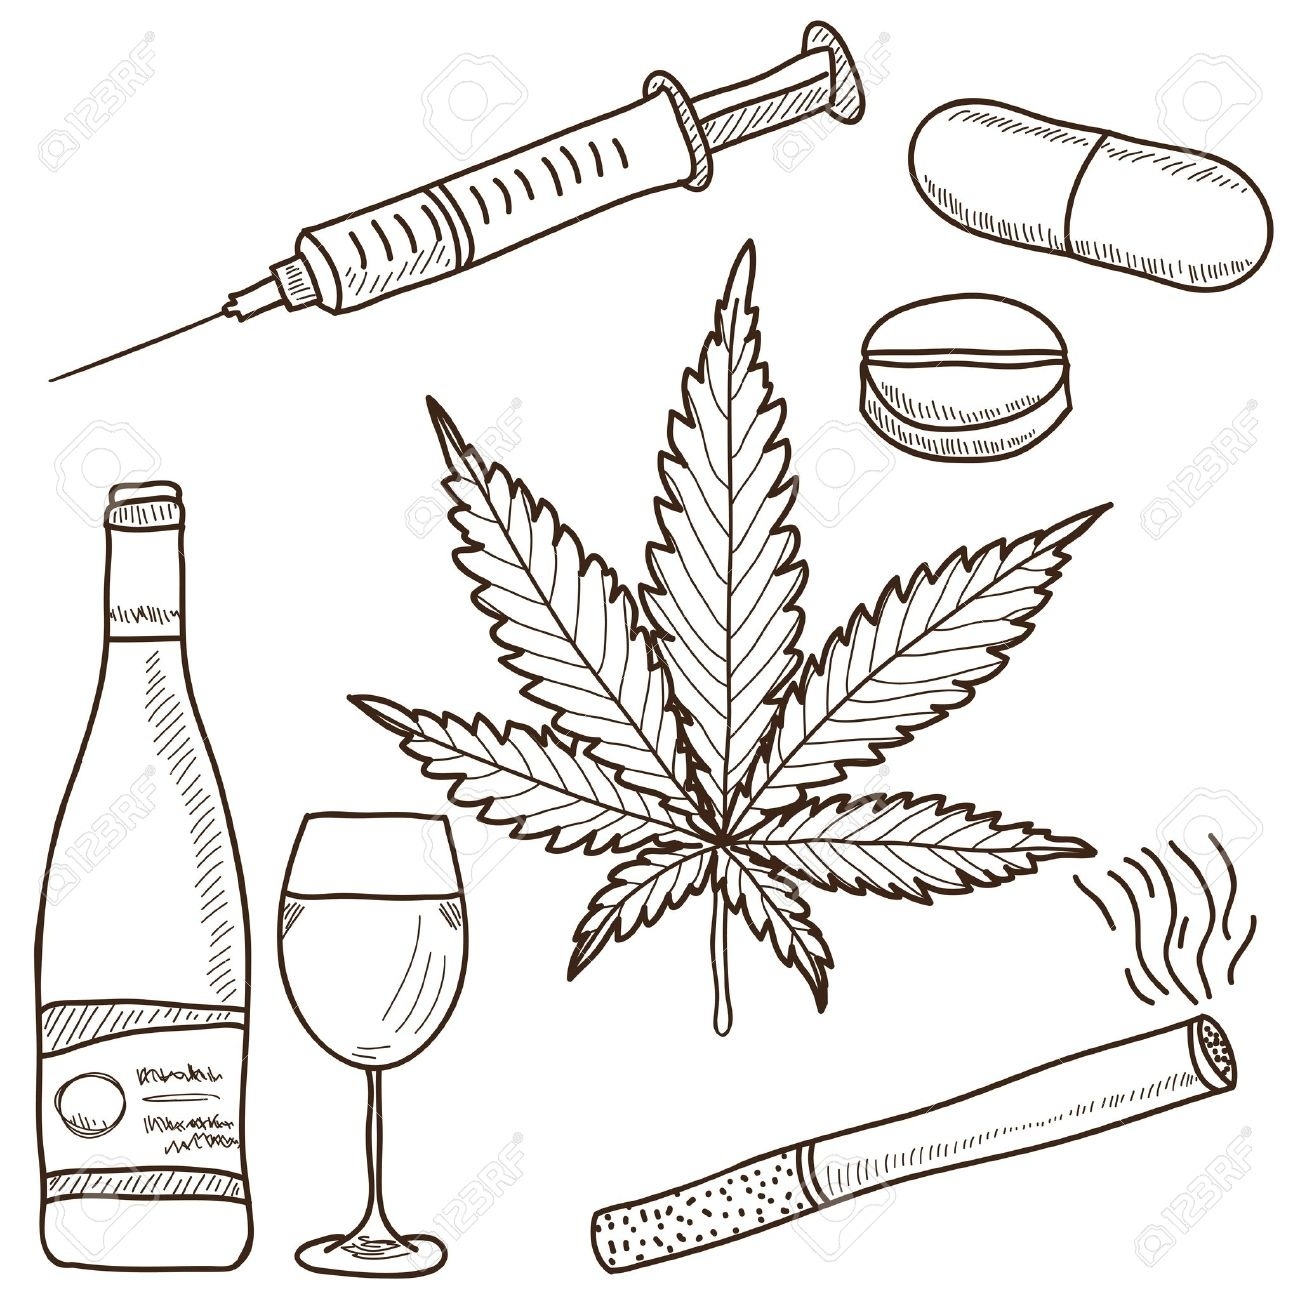 drugs clipart sketch